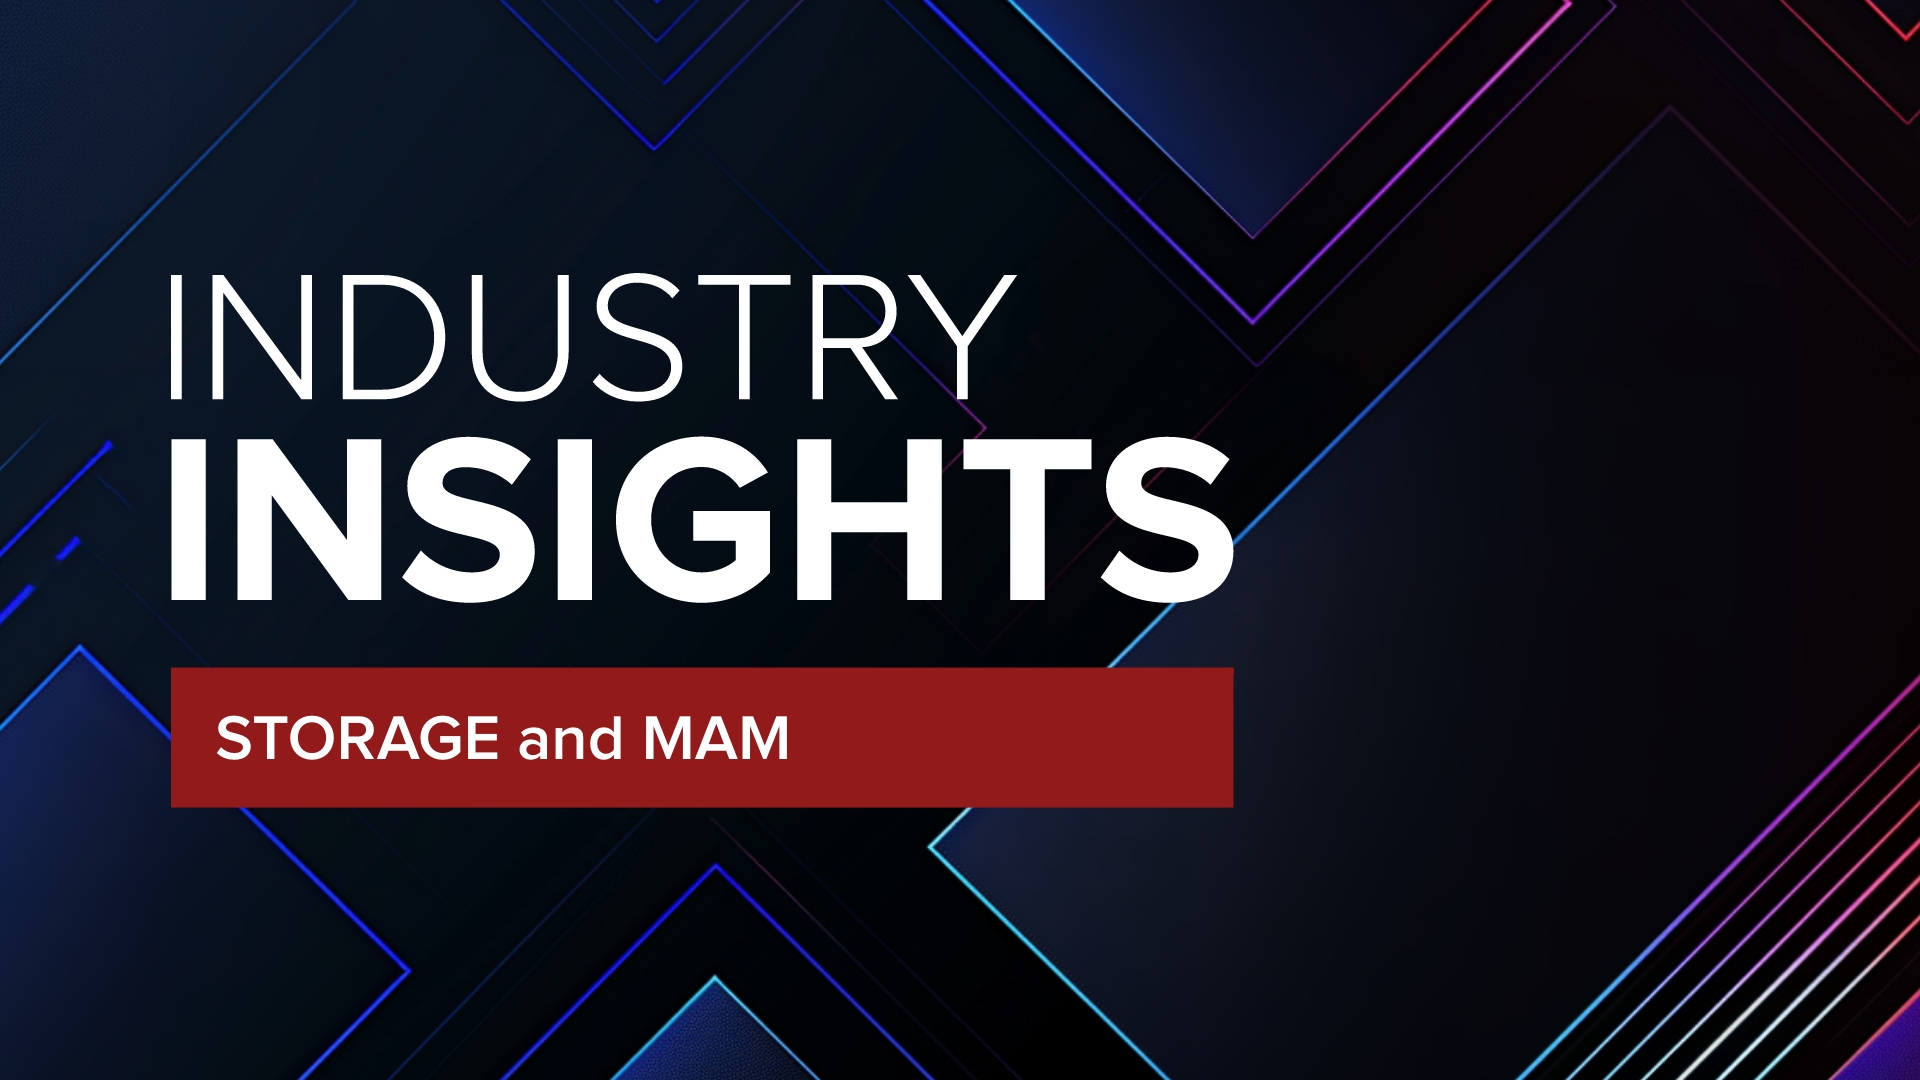 Industry Insights Storage and media asset management